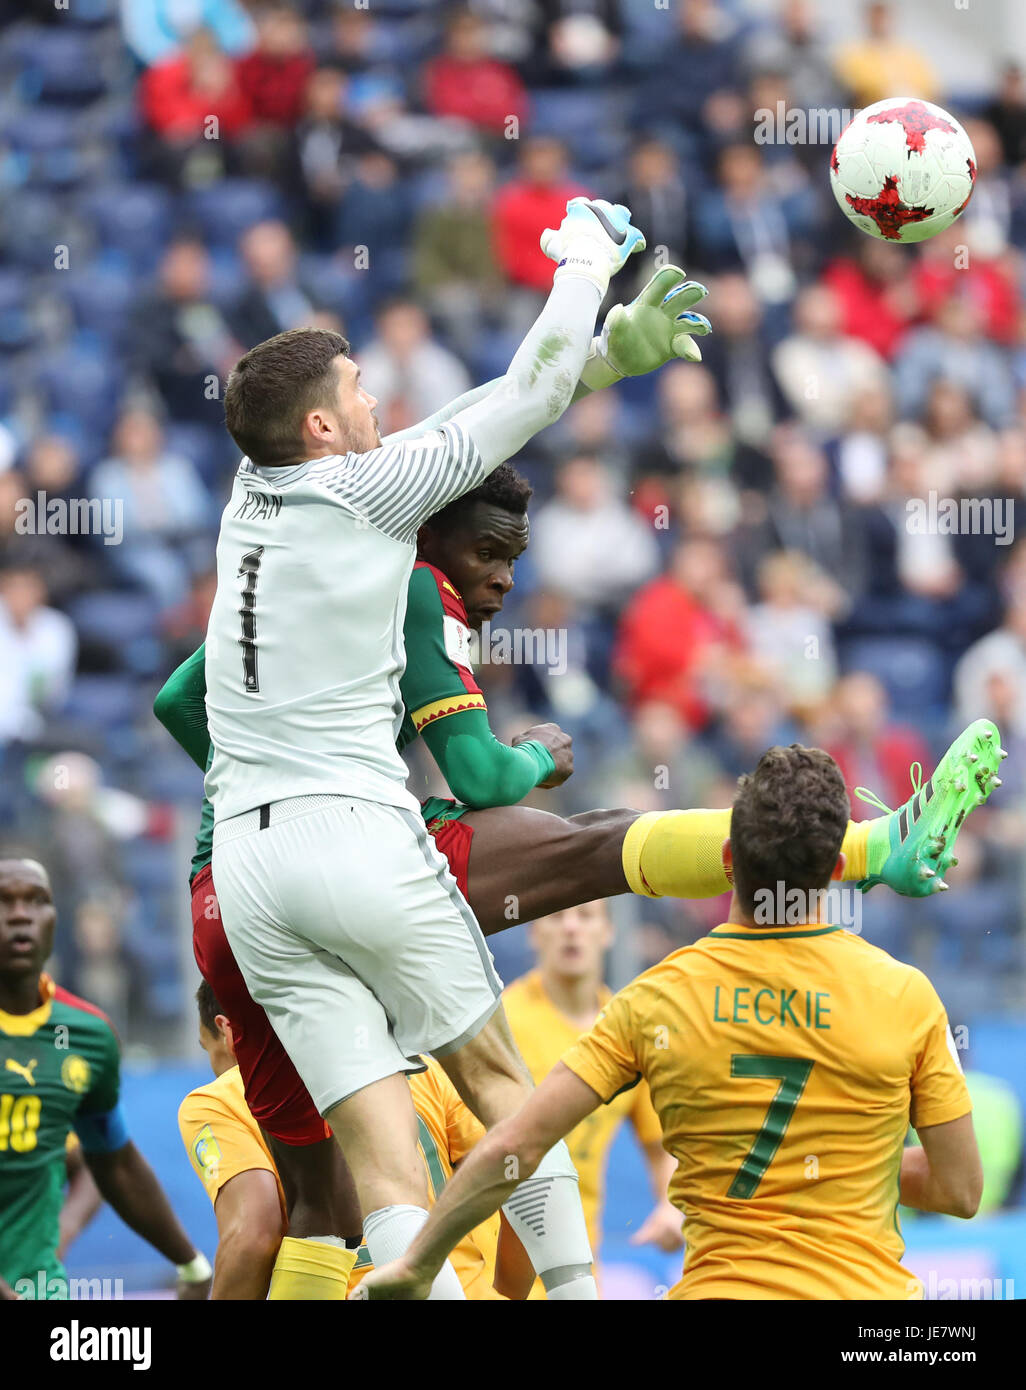 St. Petersburg, Russia. 22nd June, 2017. Maty Ryan (Top), goalkeeper of Australia saves during the group B match between Cameroon and Australia at the 2017 FIFA Confederations Cup in St. Petersburg, Russia, on June 22, 2017. The match ended with a 1-1 draw. Credit: Wu Zhuang/Xinhua/Alamy Live News Stock Photo